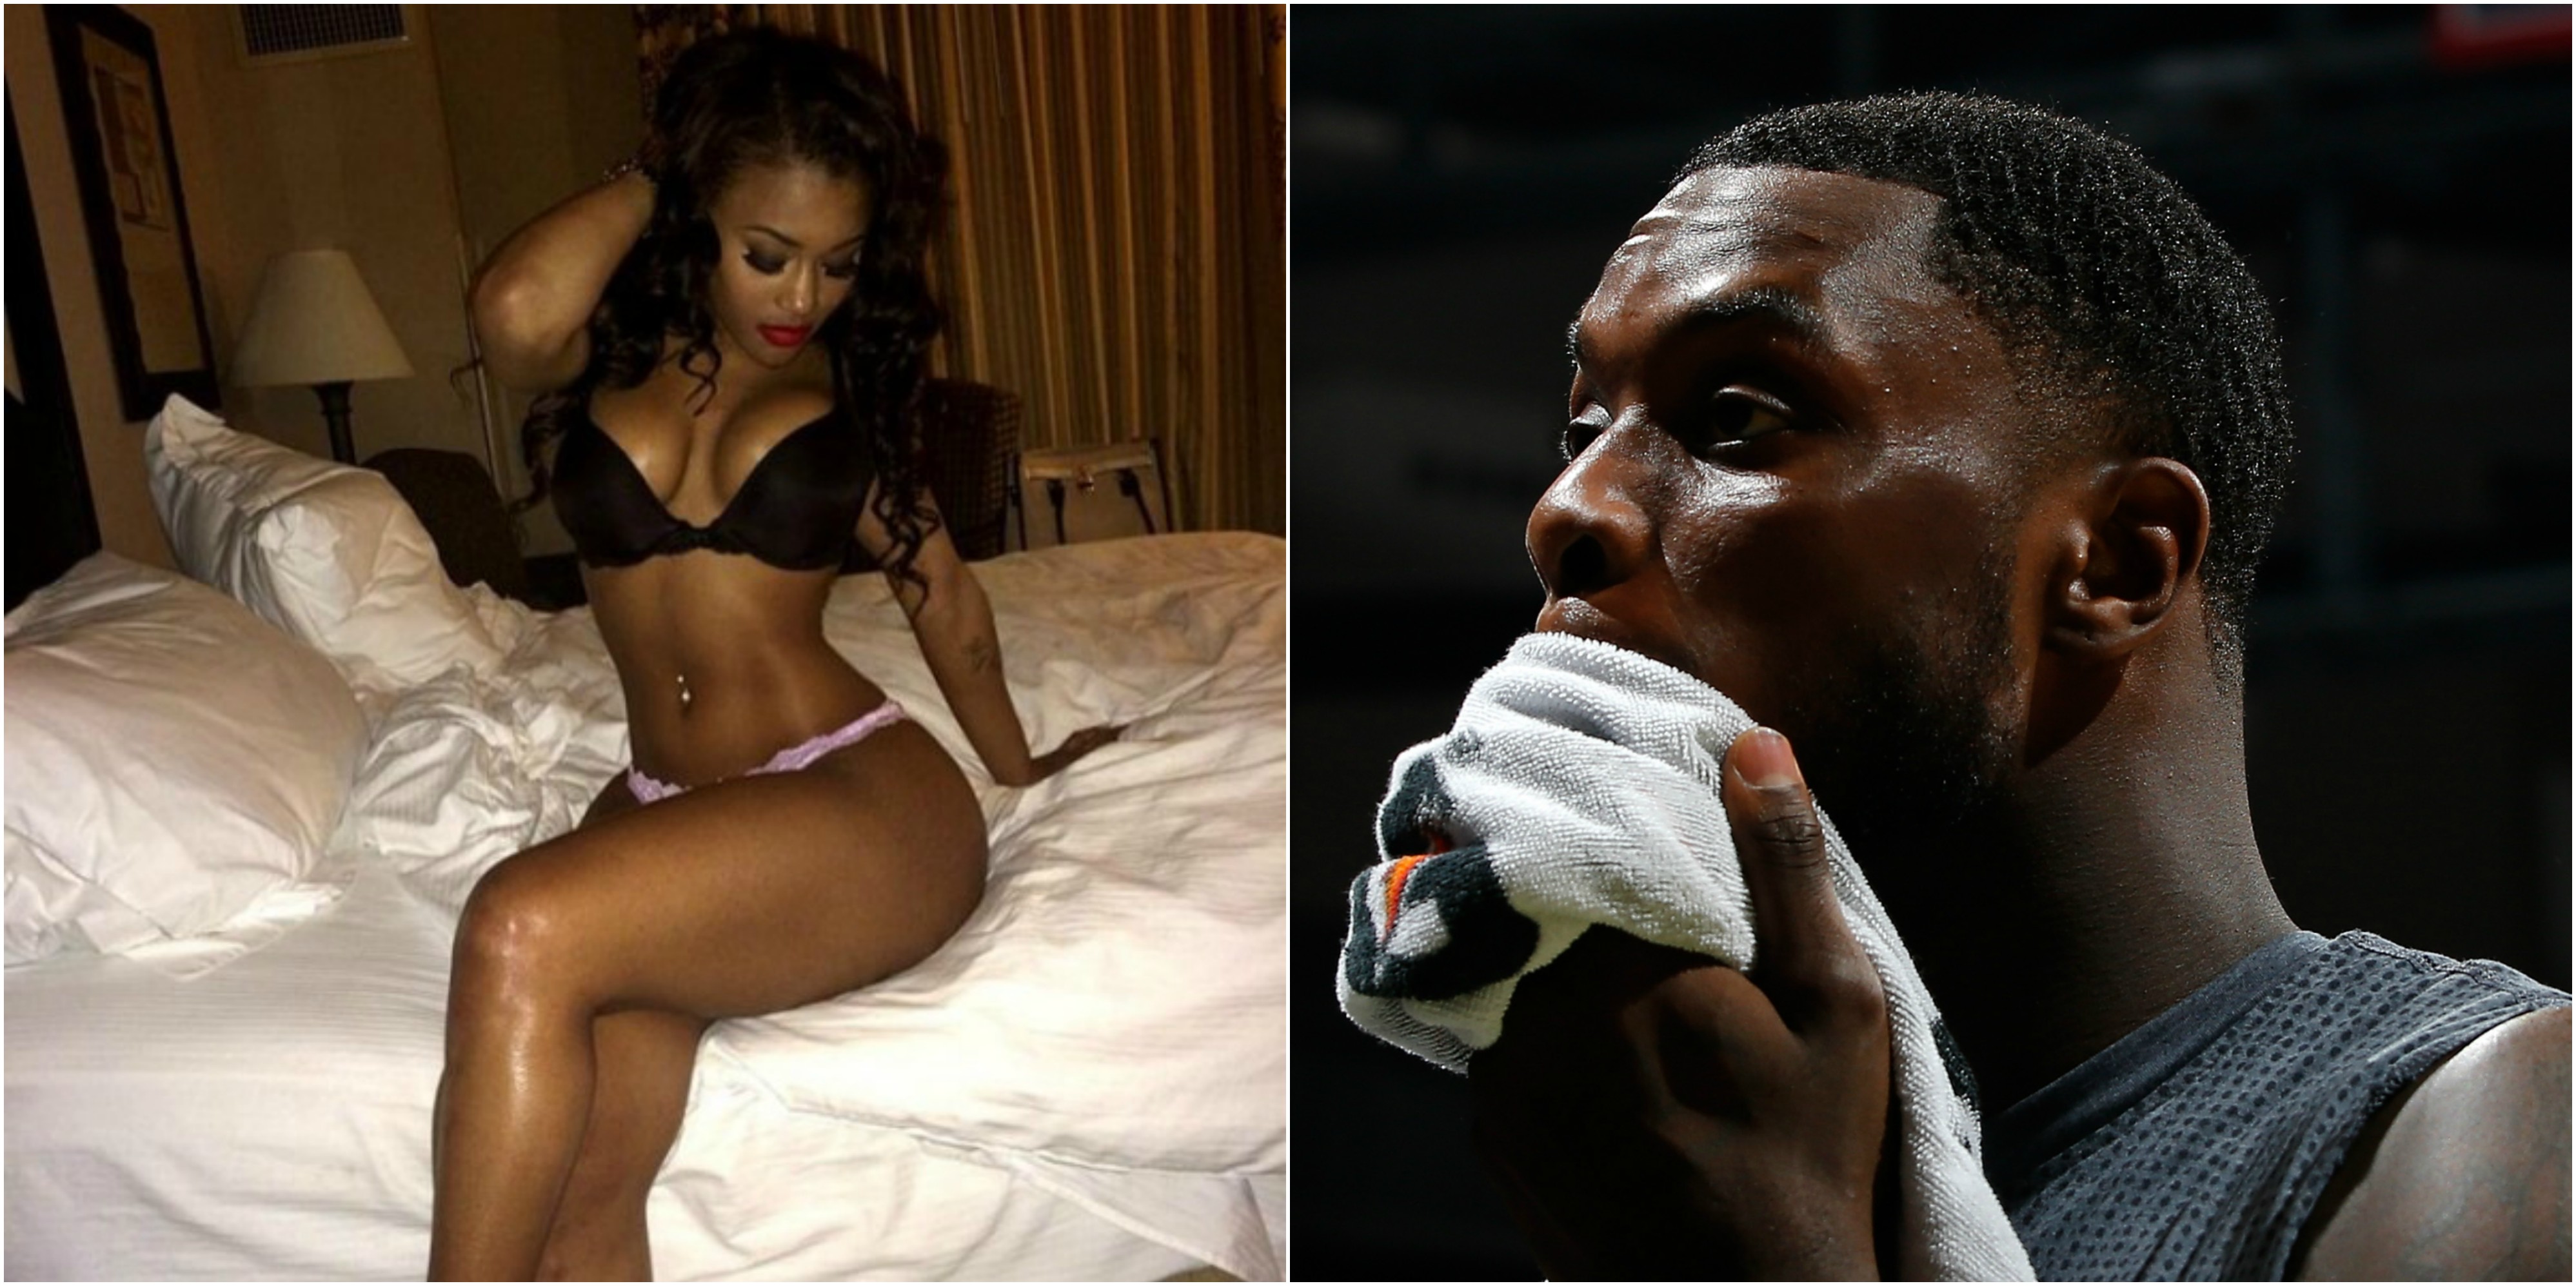 Lance Stephensons Alleged Sex Tape With Rick Ross Ex Free Download Nude Pho...